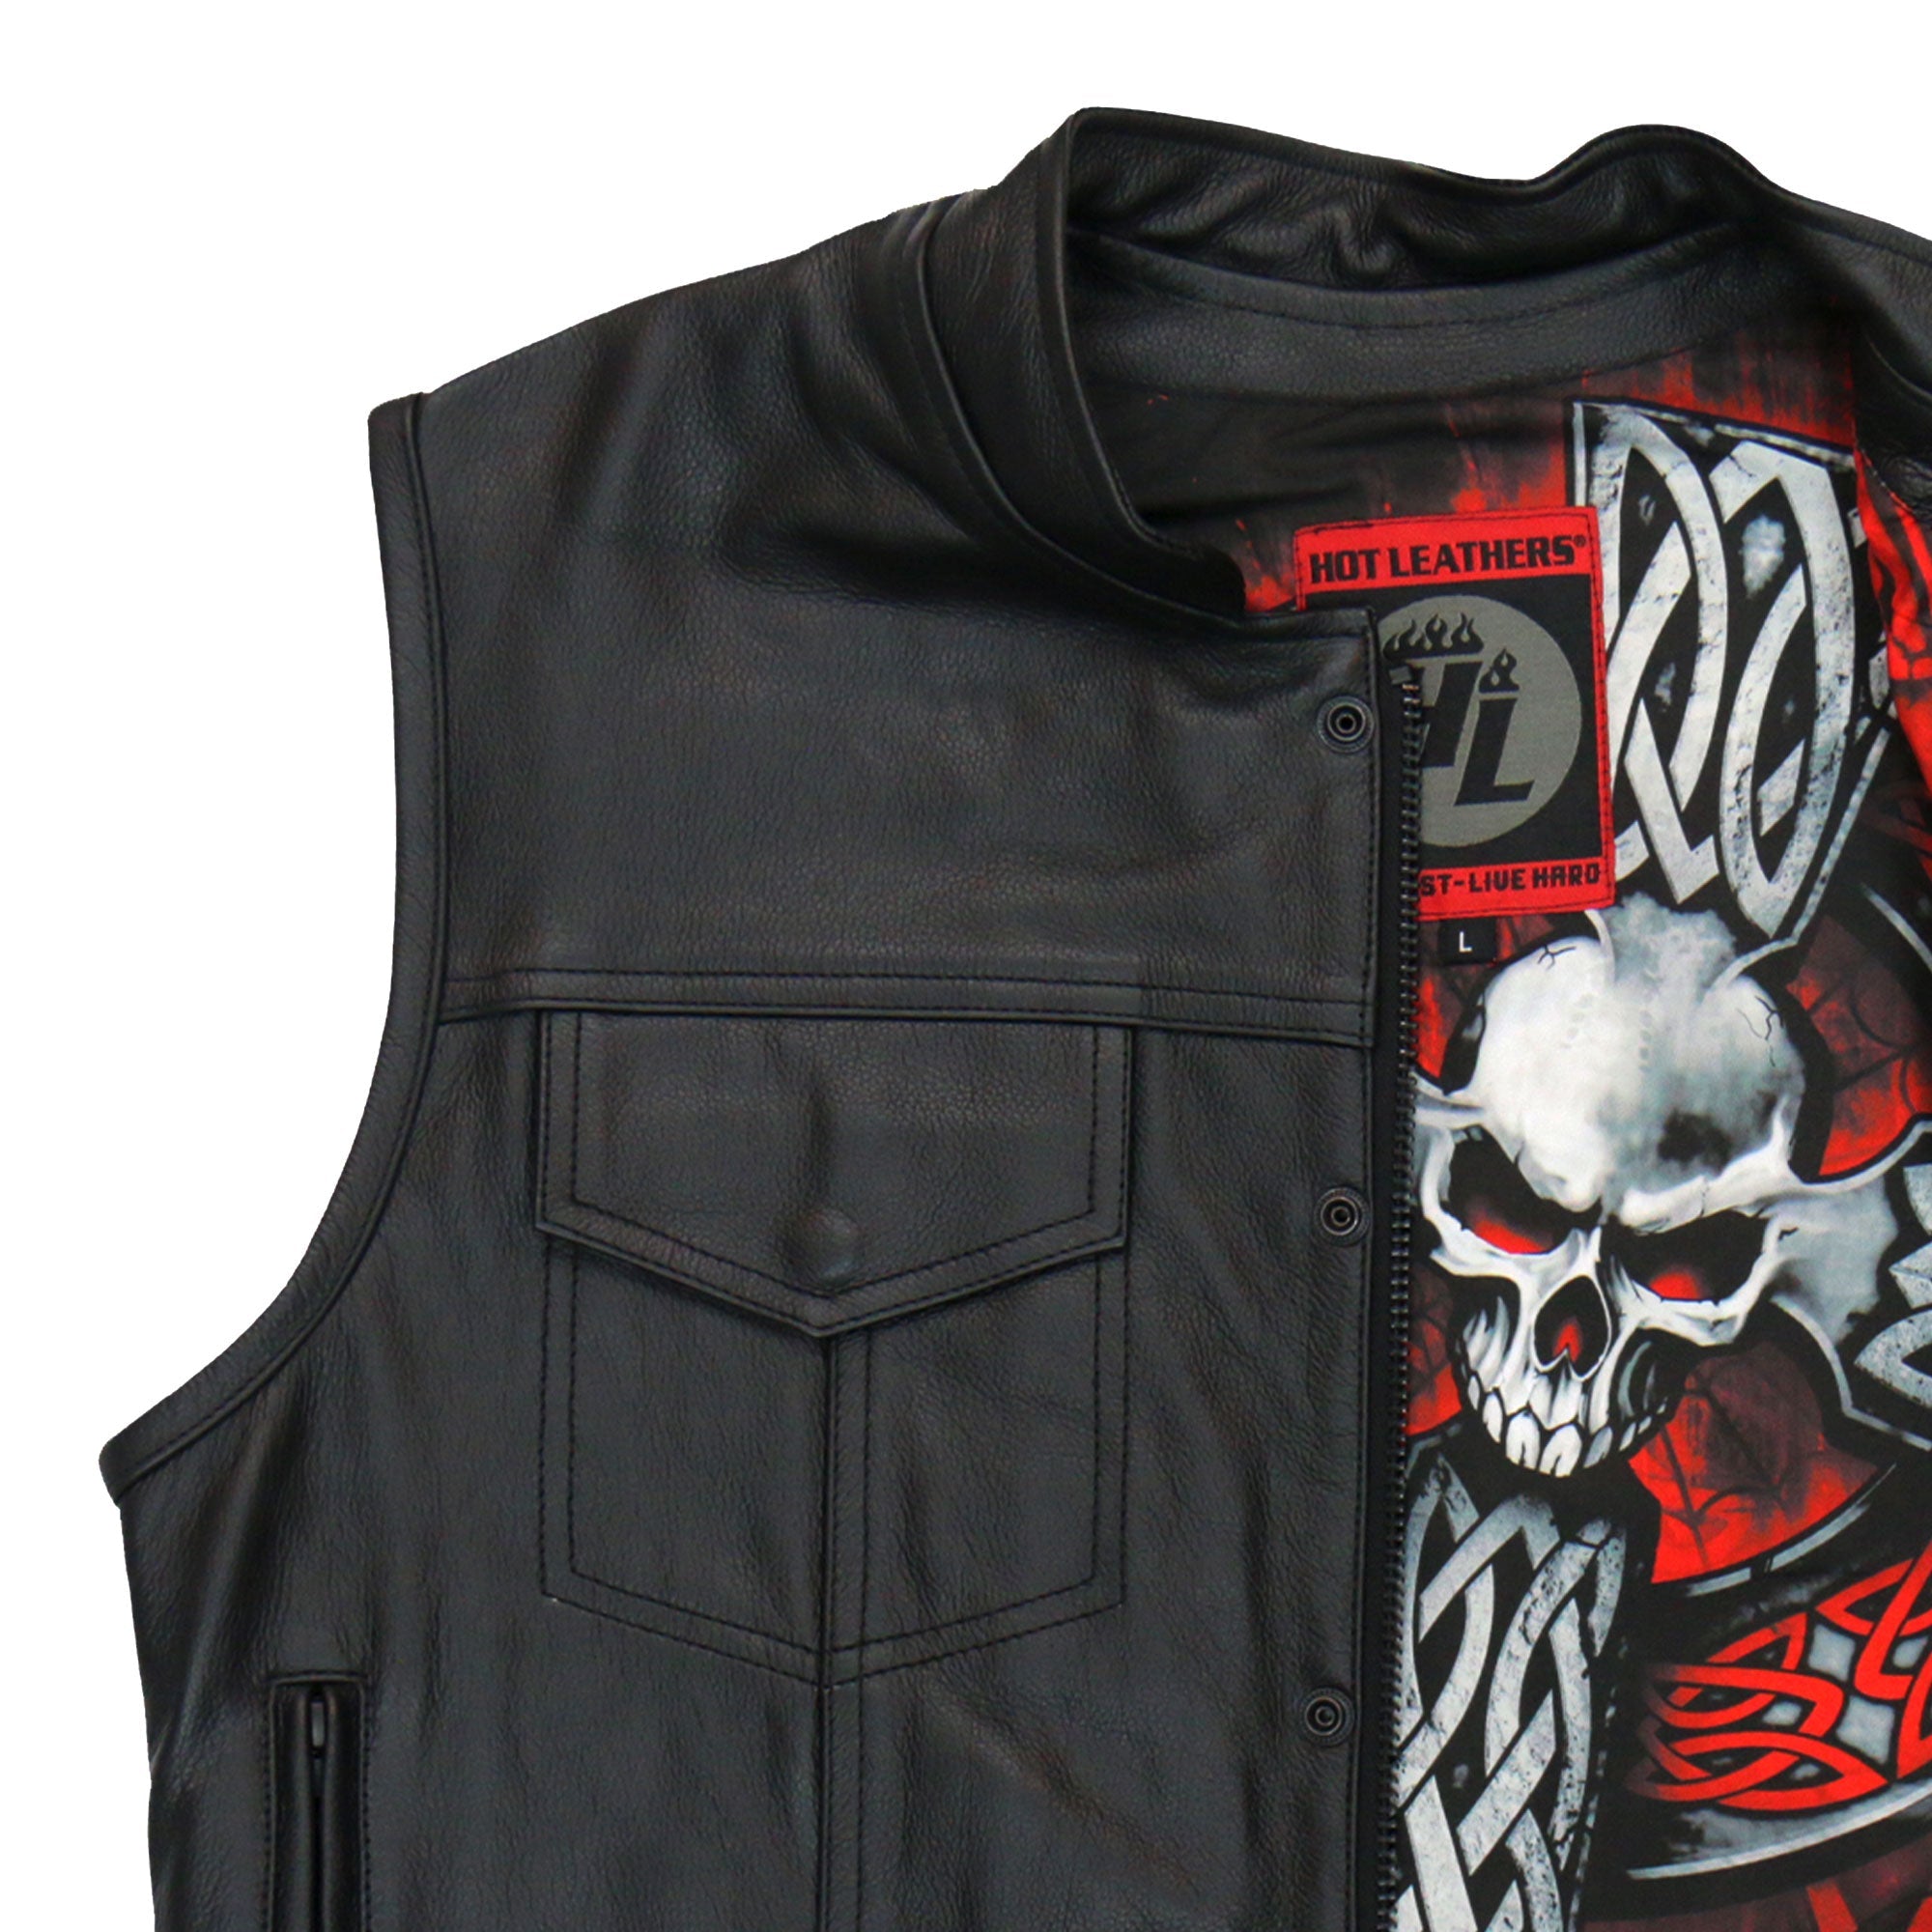 Hot Leathers VSM1051 Men's Black 'Celtic Cross' Motorcycle Club Style Conceal and Carry Leather Biker Vest